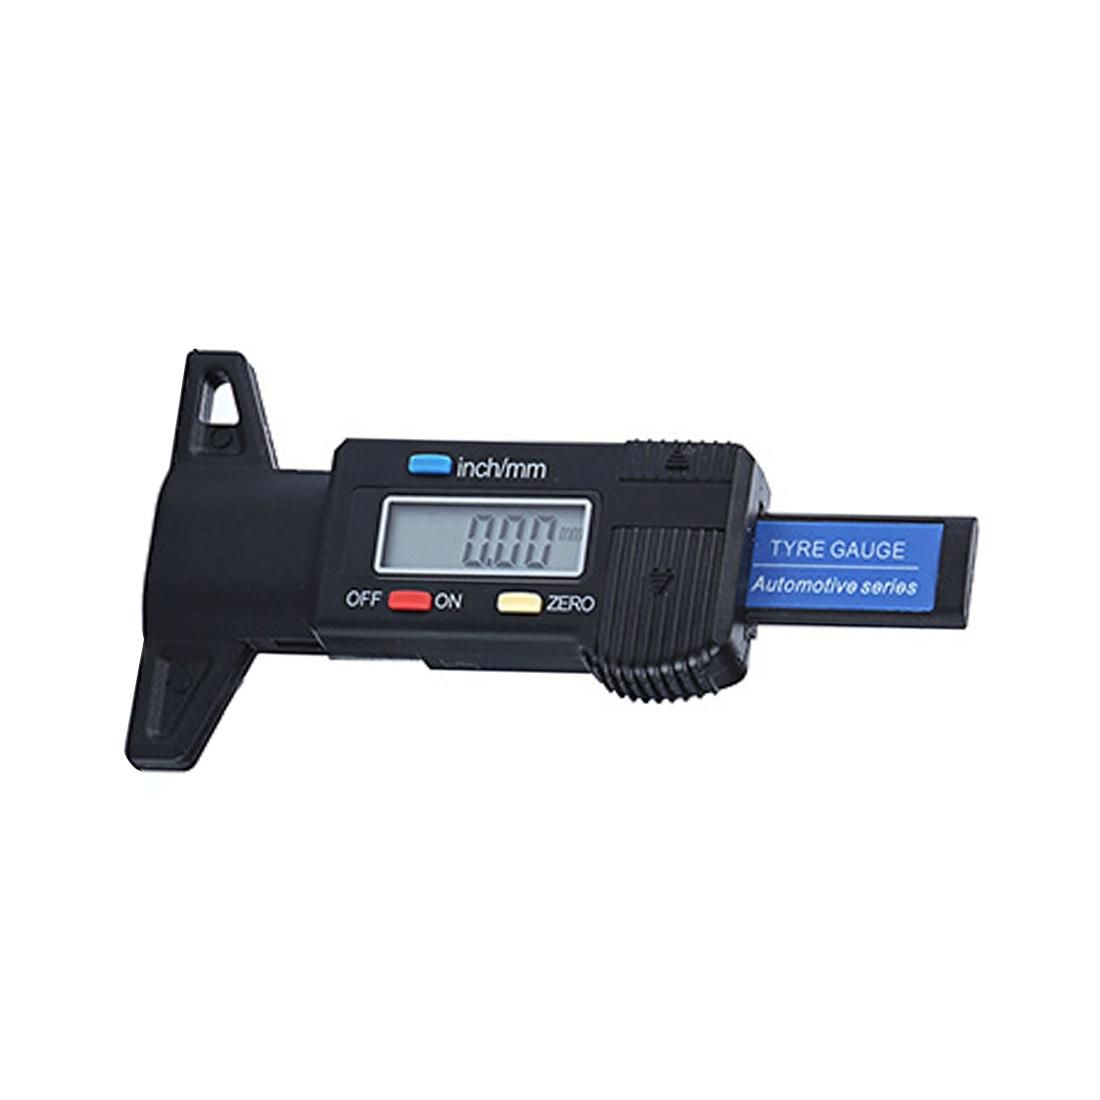 0-25mm Electronic Digital Tread Plan Refinding Rounds Refinding Outcome Exists Tread Tablets Type Gauge Depth Vernier Caliper Measuring Tools (Blue)